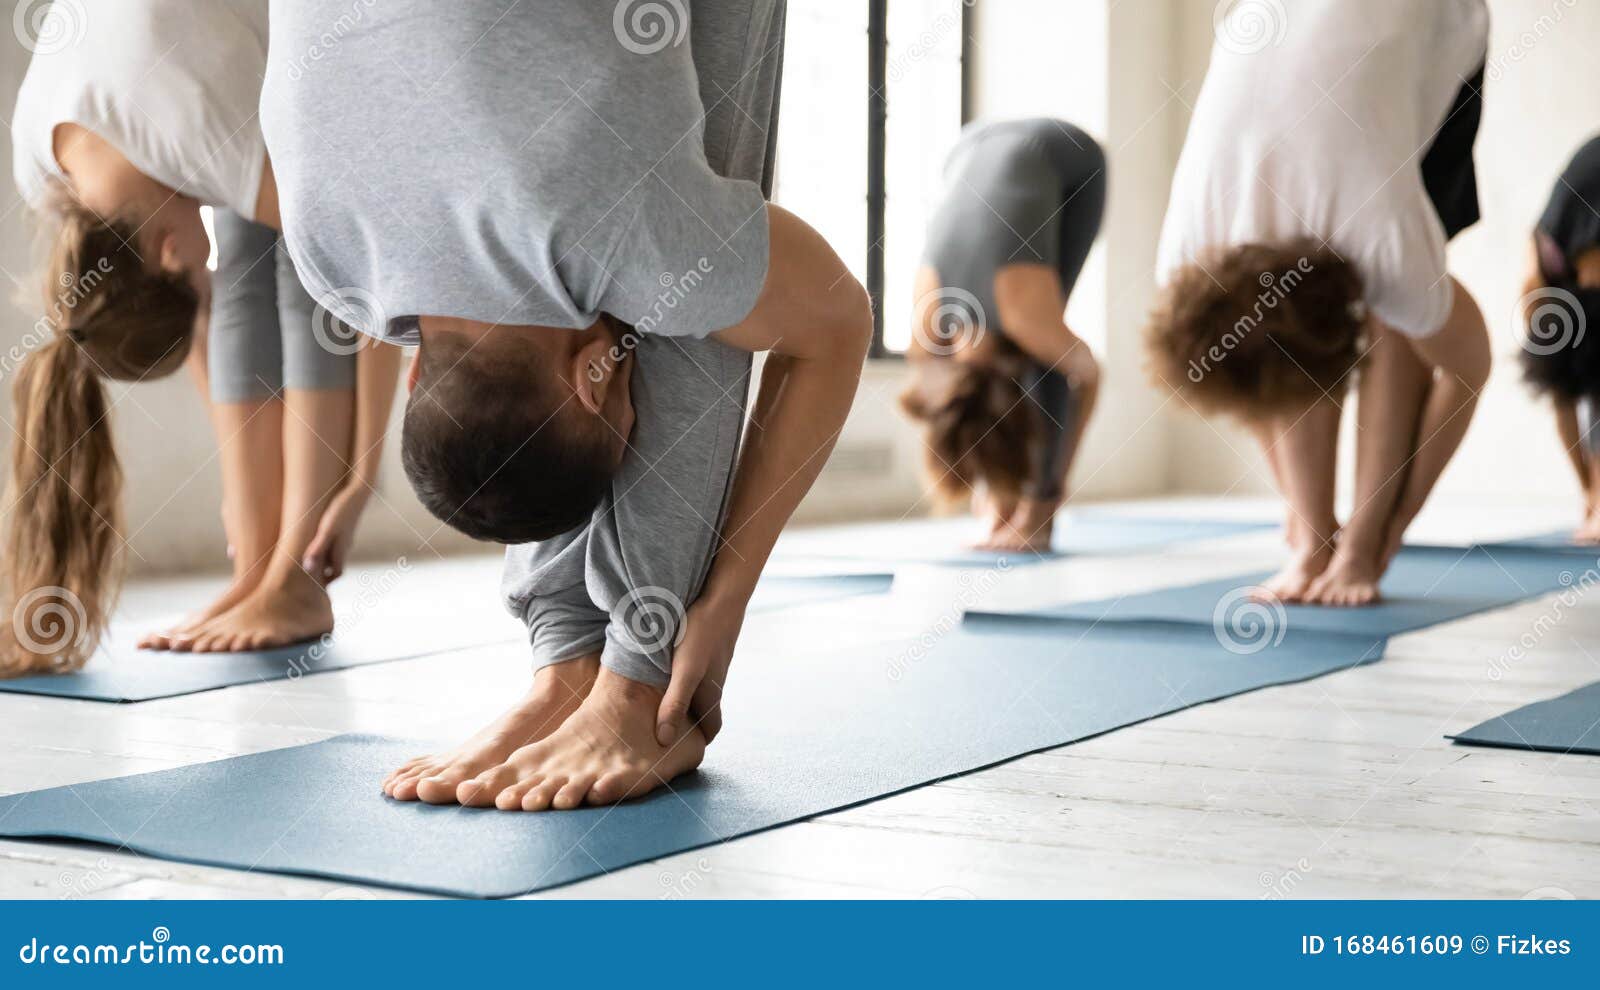 people practicing yoga at group lesson, standing in uttanasana pose